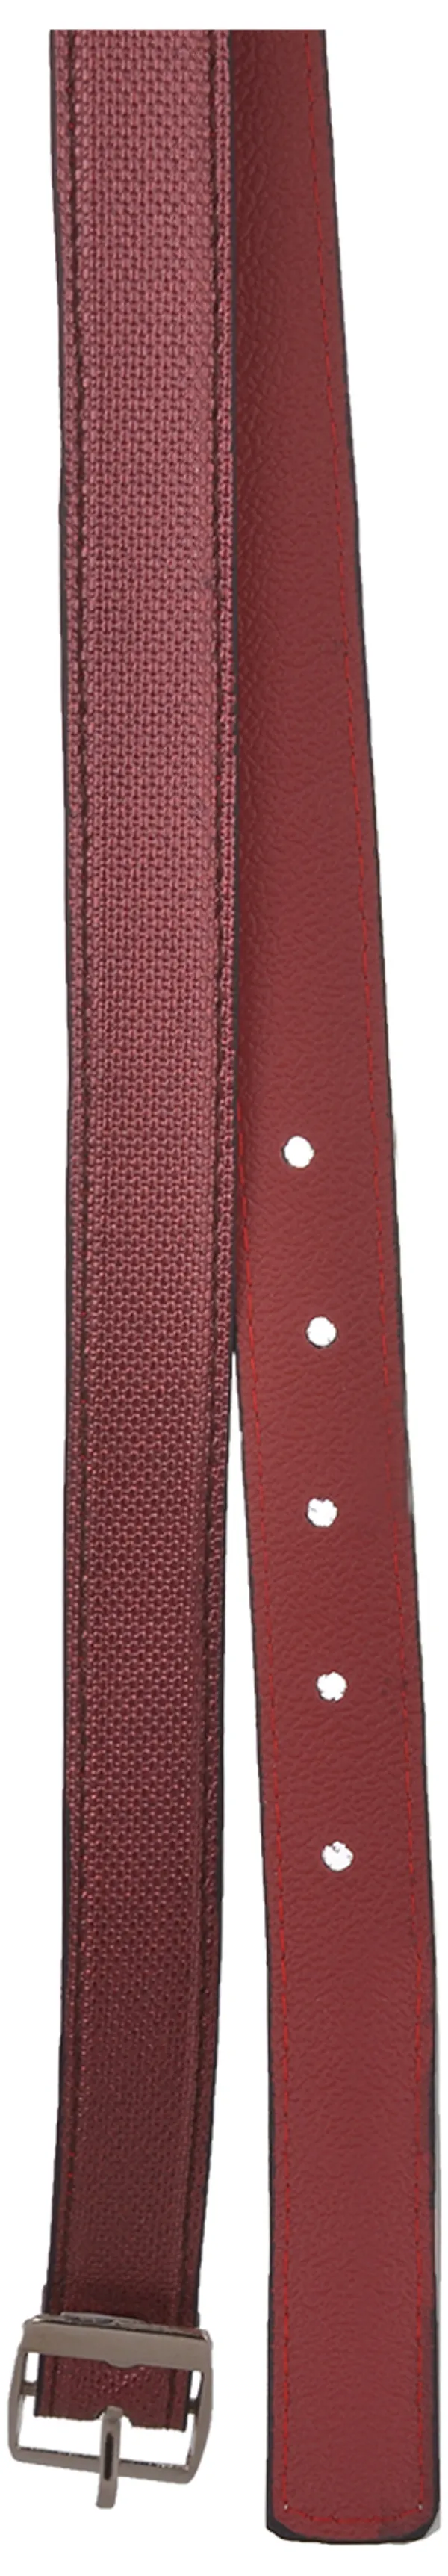 Exotique_Red_Casual_Faux_Leather_Belt_For_Women_(BW0004RD)__Exotique